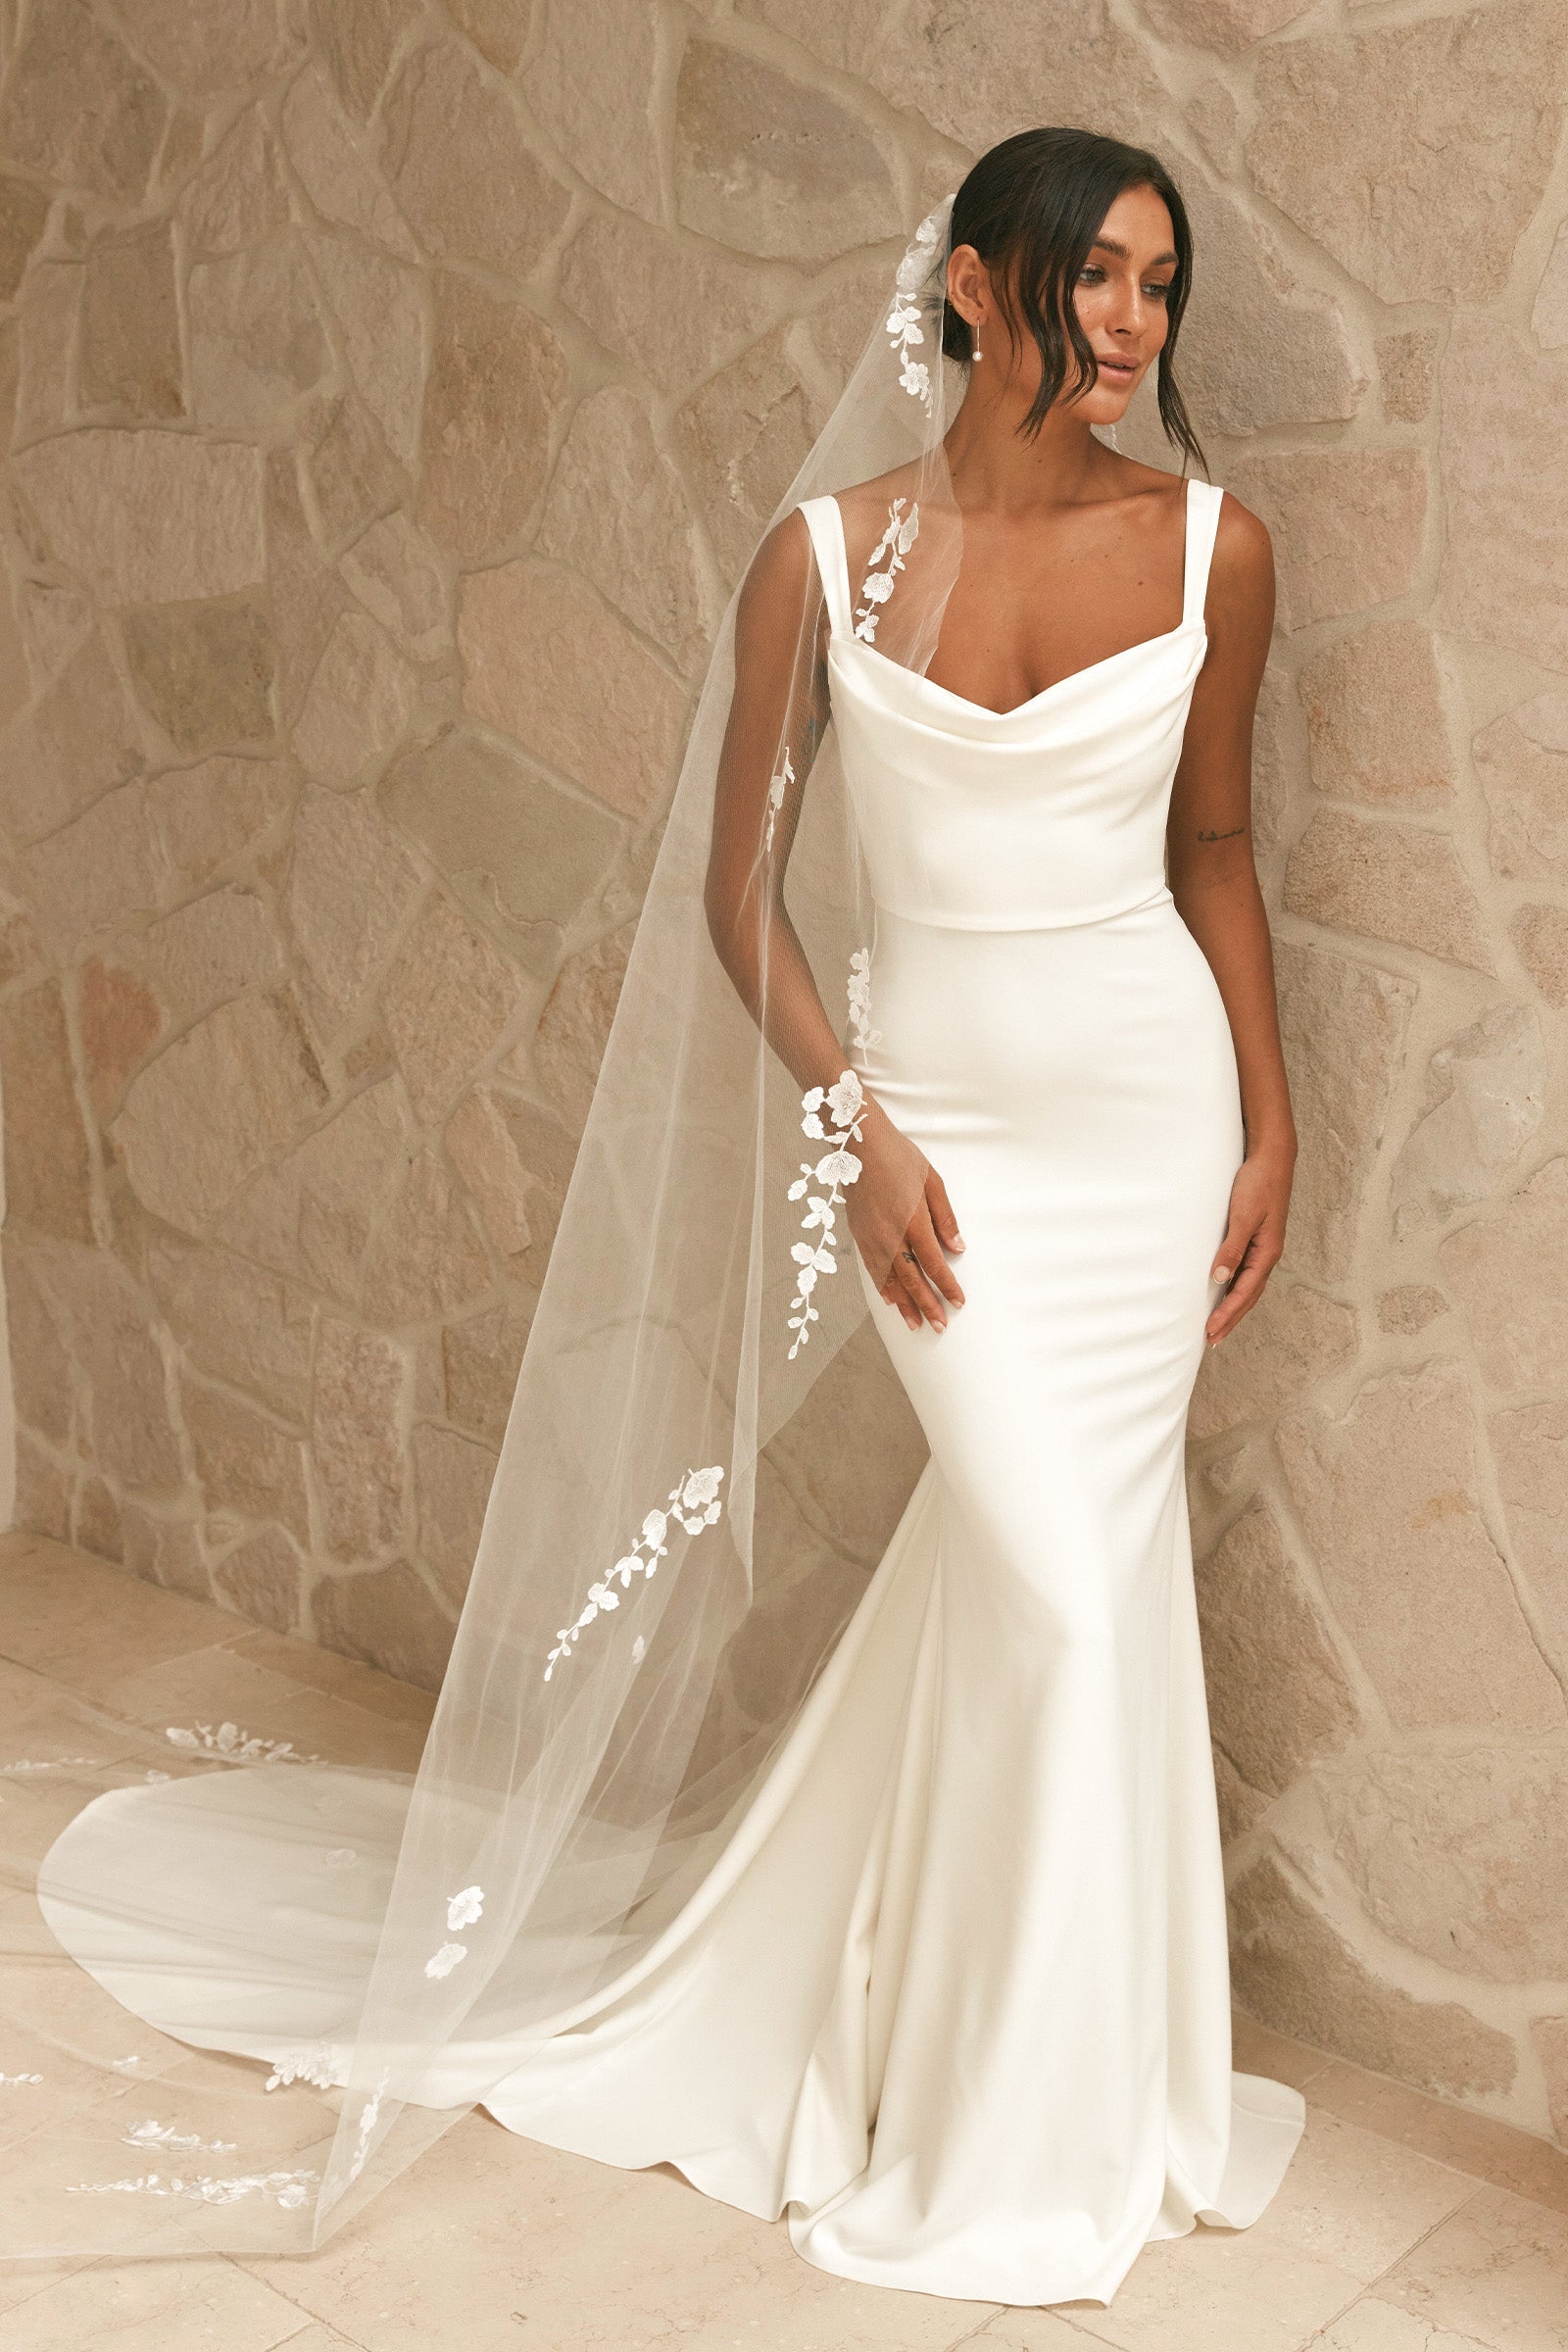 Choosing the Right Undergarments for Your Wedding Gown - Boston